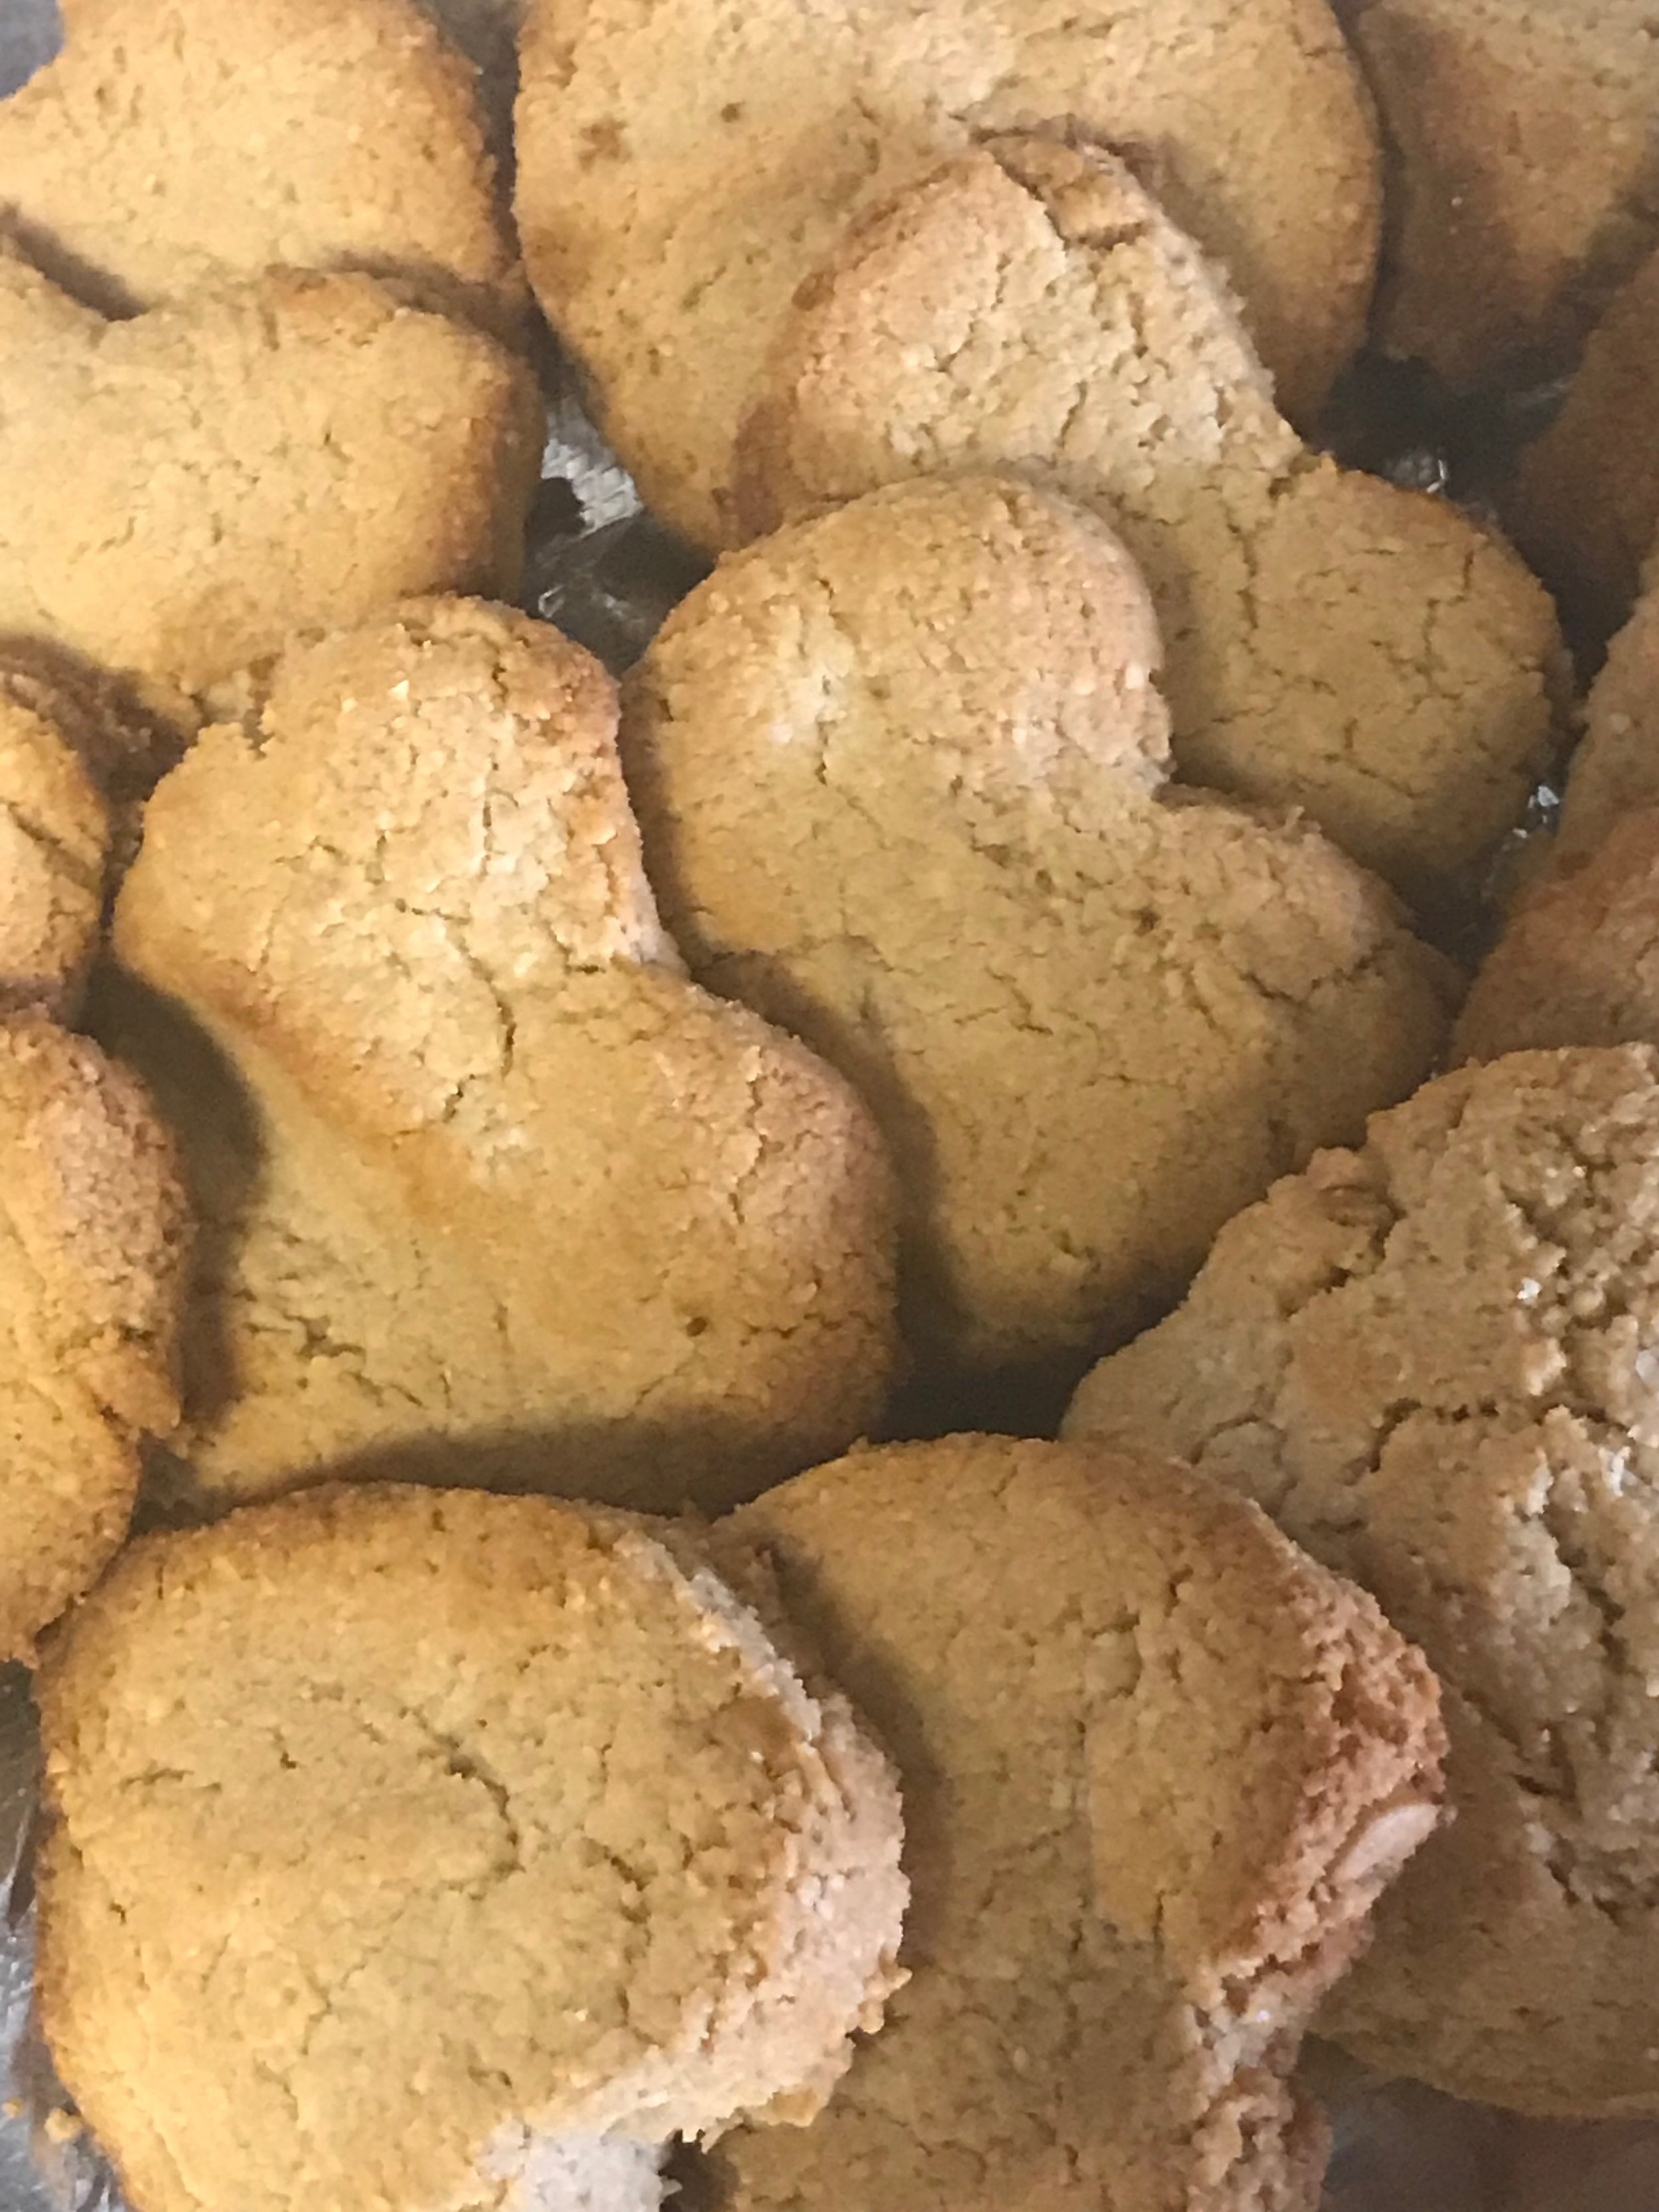  Homemade Dog Scones and Dog Biscuits 